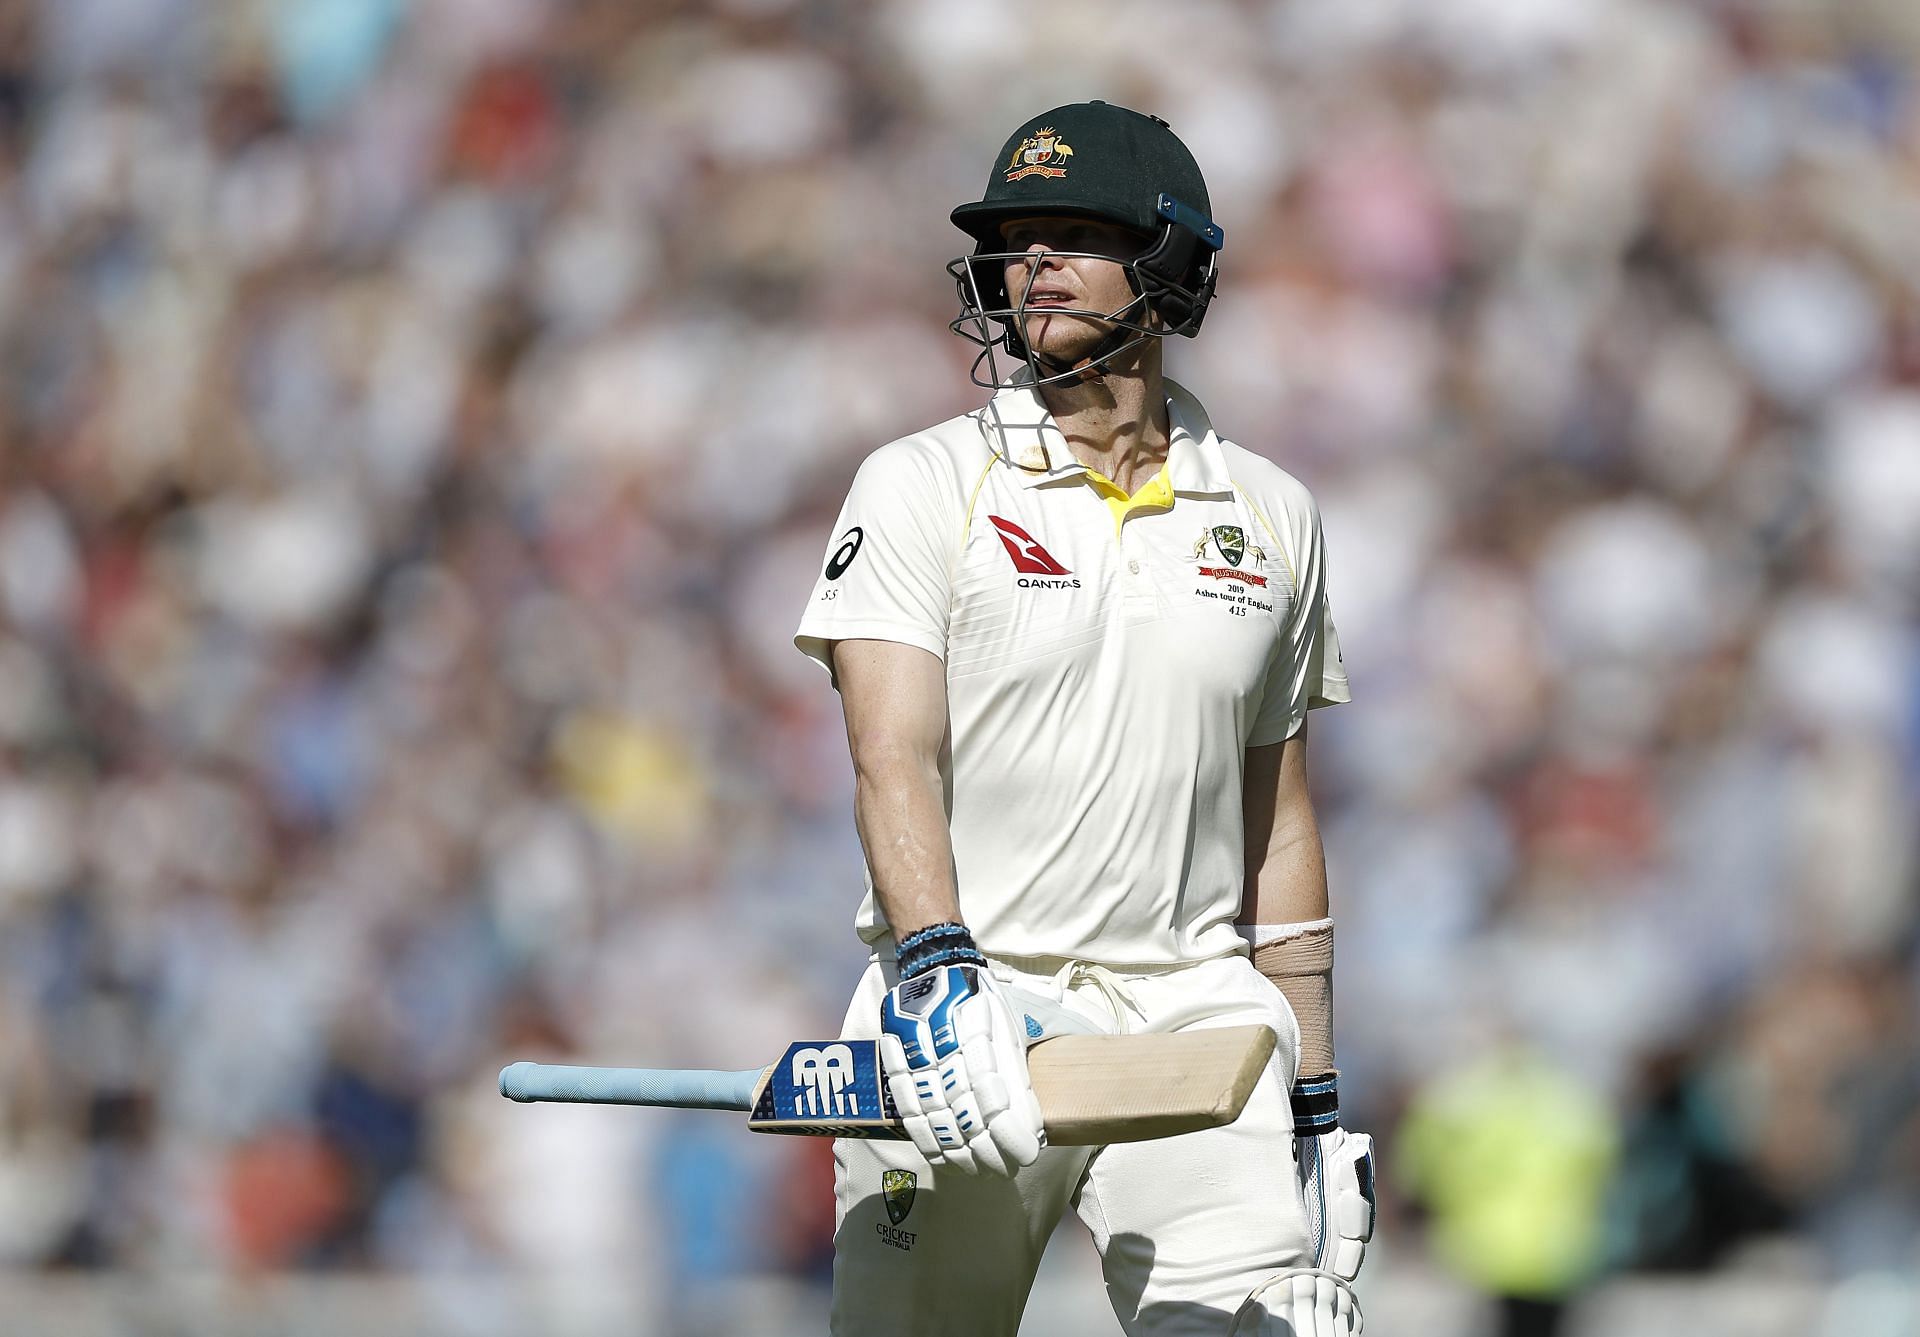 Steve Smith in action during Ashes 2019. (Credits: Getty)